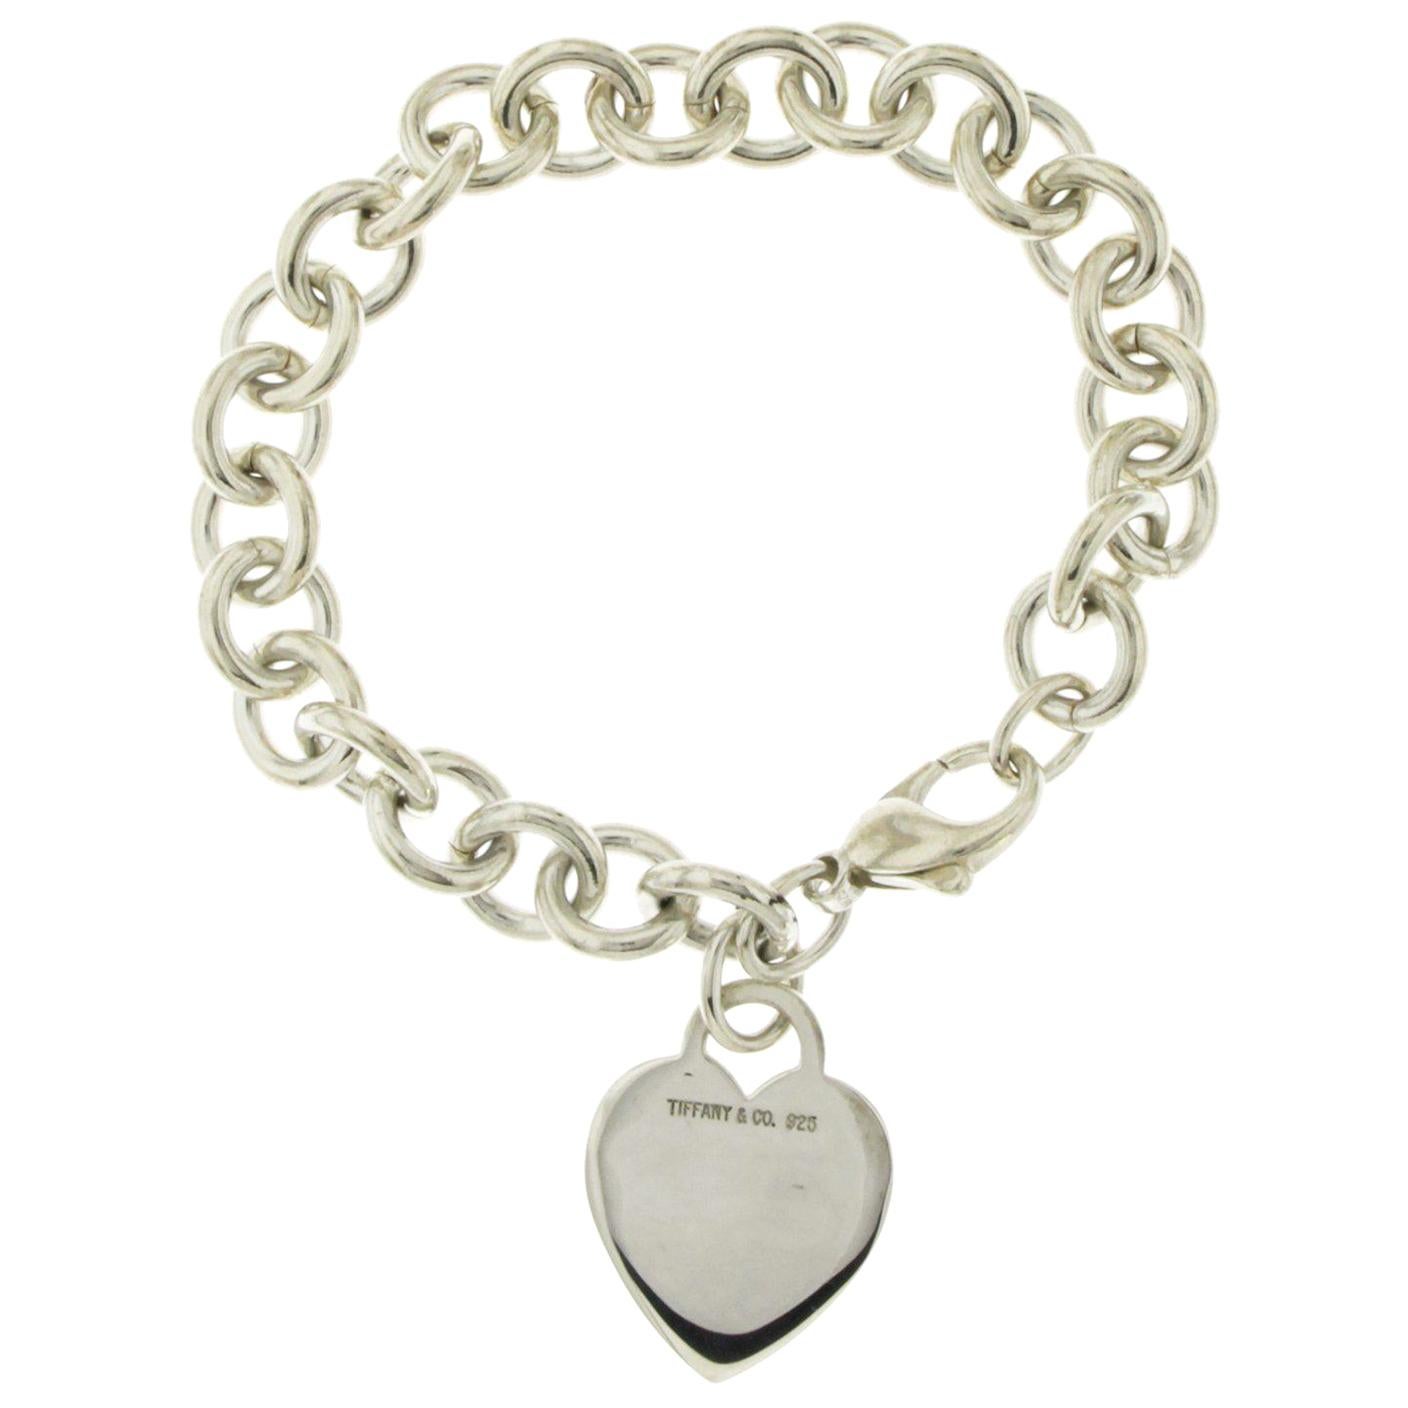 Auth Tiffany & Co. 925 Sterling Silver Heart Tag Charm Bracelet